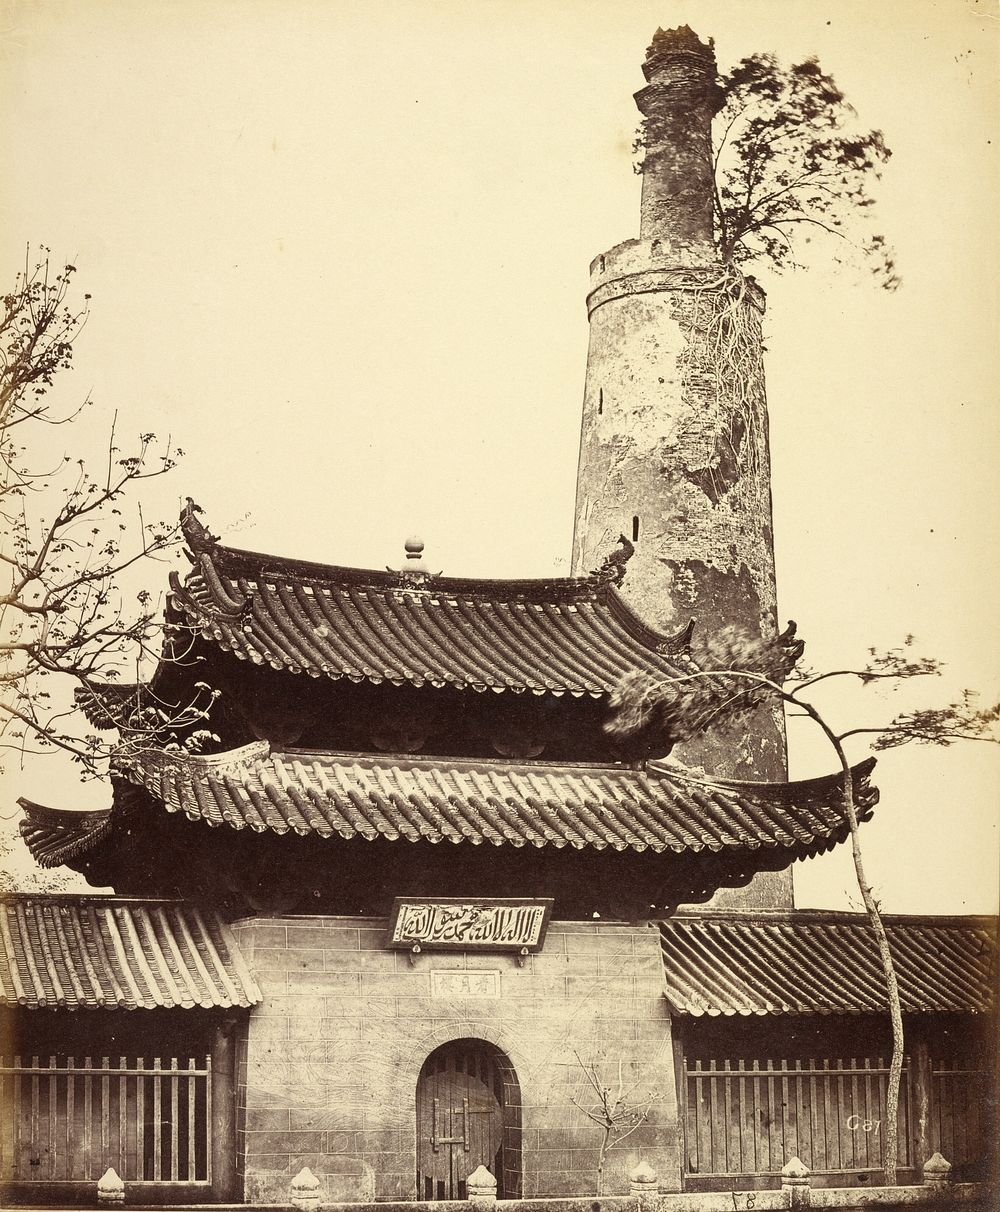 Mahomedan Mosque, Canton, China by Felice Beato and Henry Hering